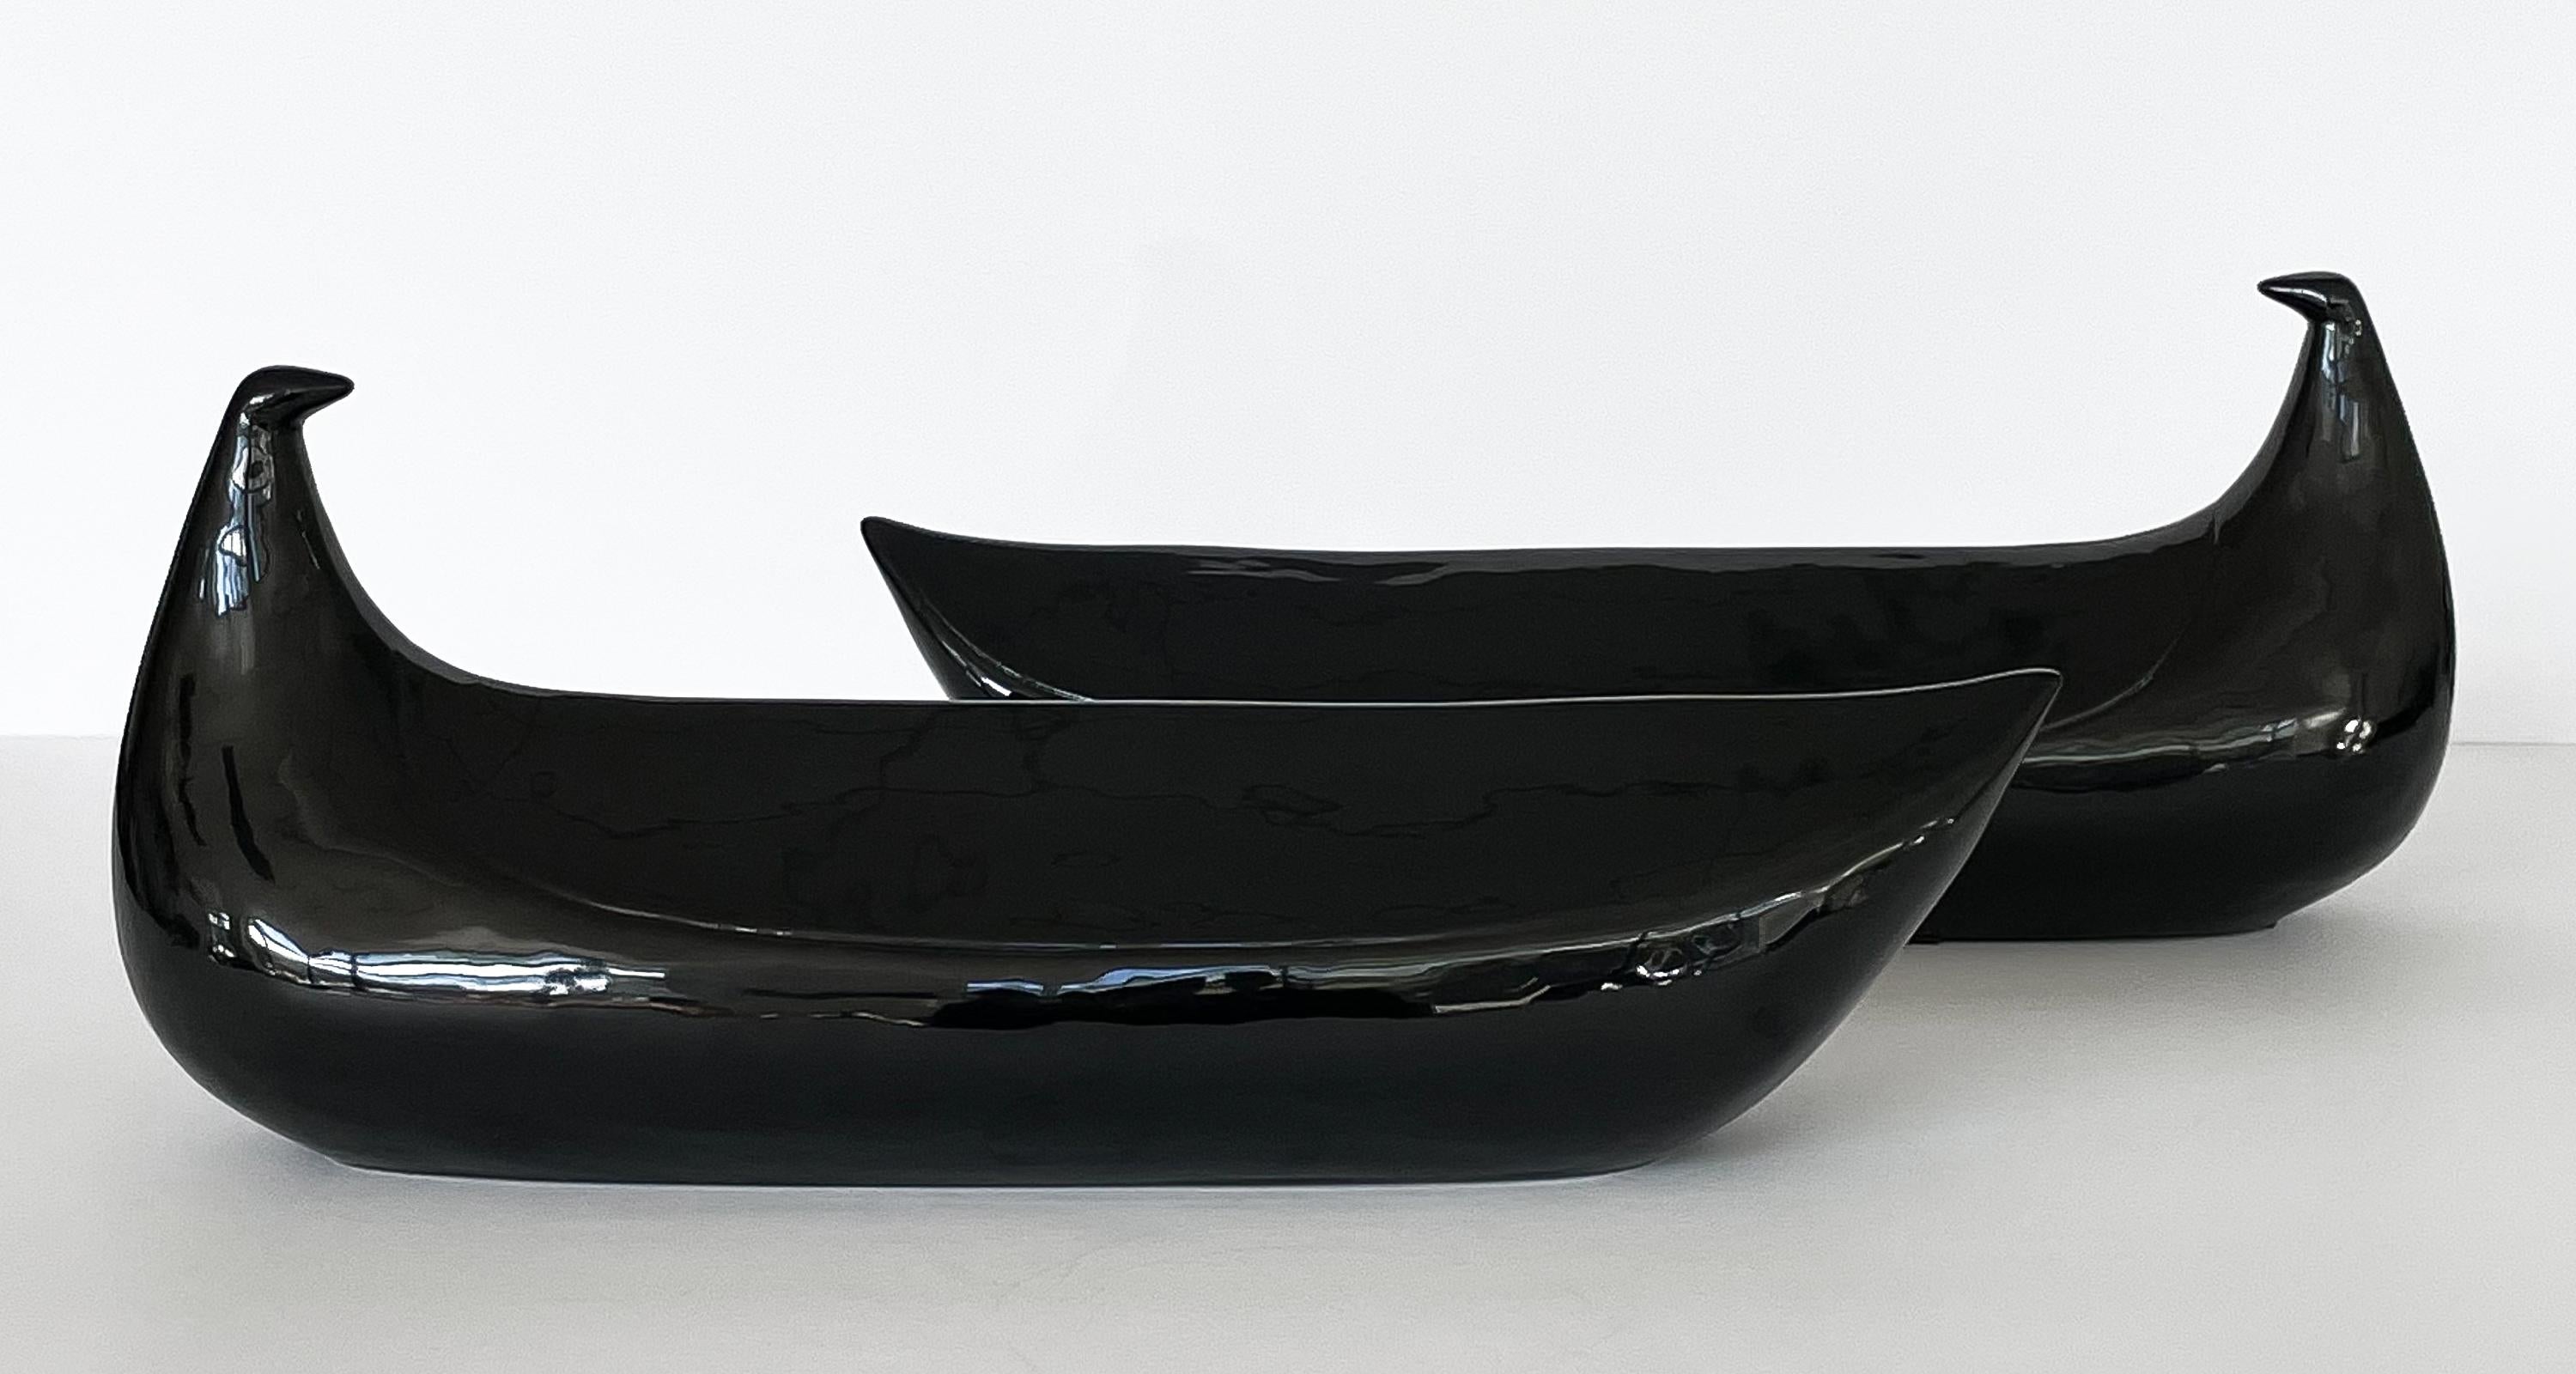 These exquisite black ceramic dove sculptures by Pompeo Pianezzola for Zanolli & Sebellin Nove, crafted in Italy during the vibrant 1960s, are a perfect blend of minimalist design and modern aesthetics. Their abstract dove shapes are rendered in a